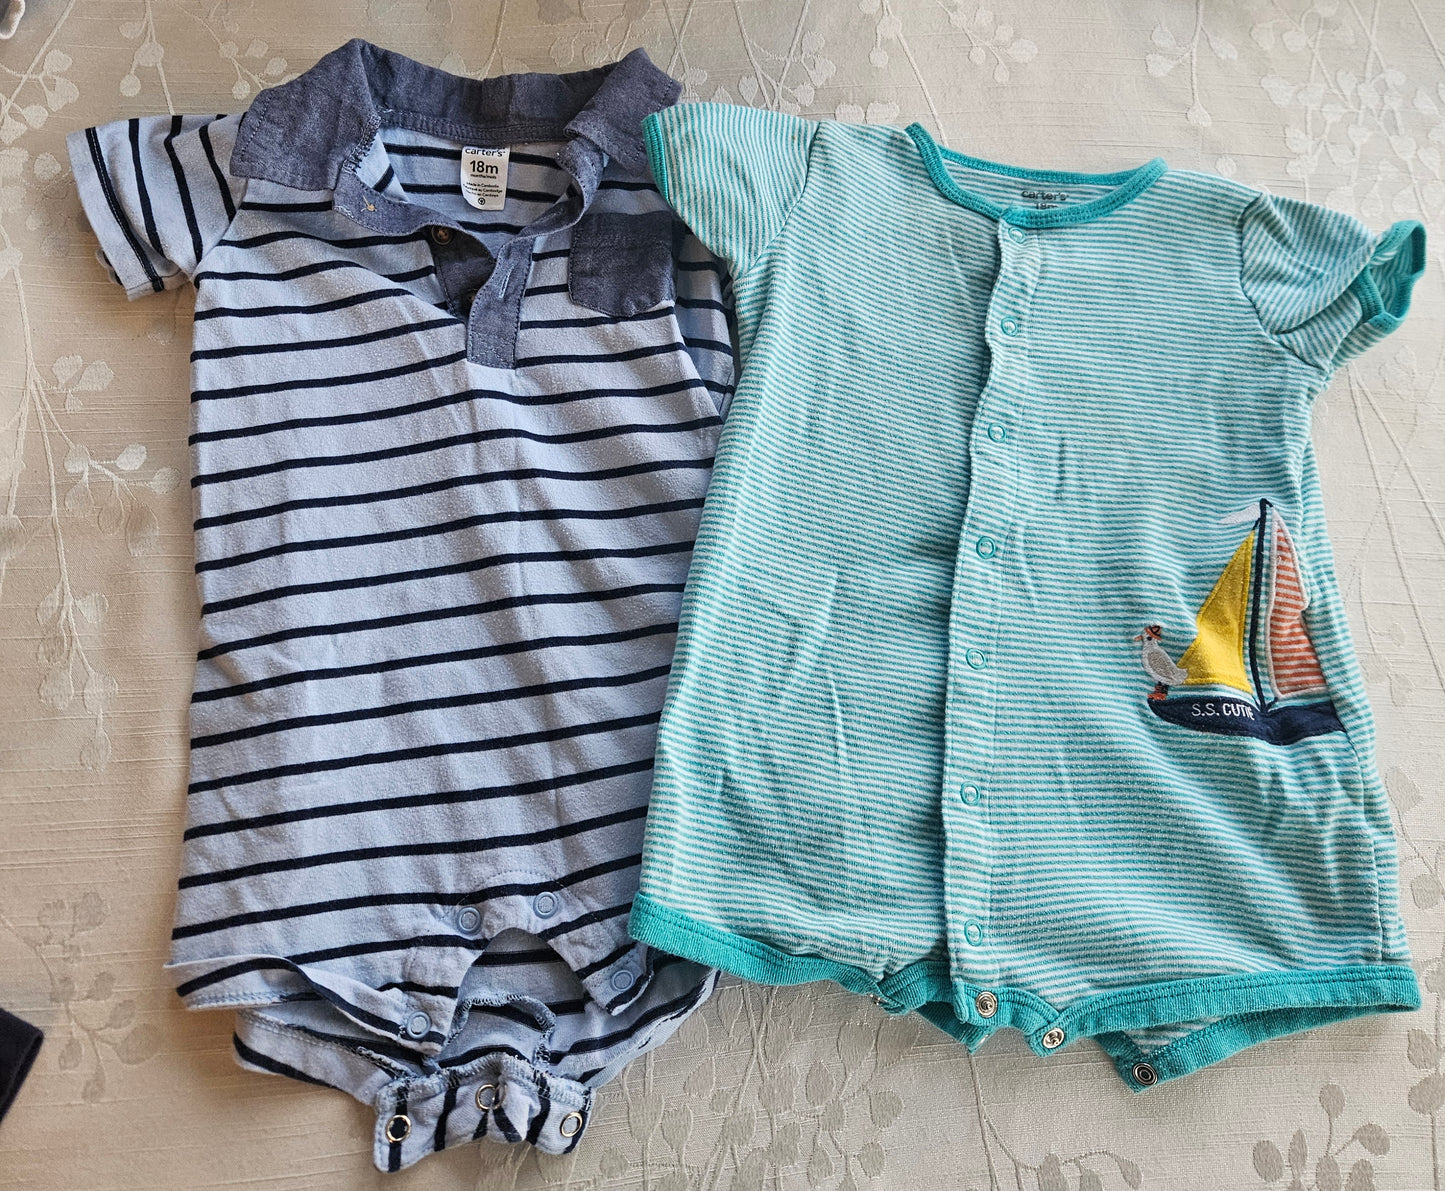 Carters Outfit Lot - 18 months